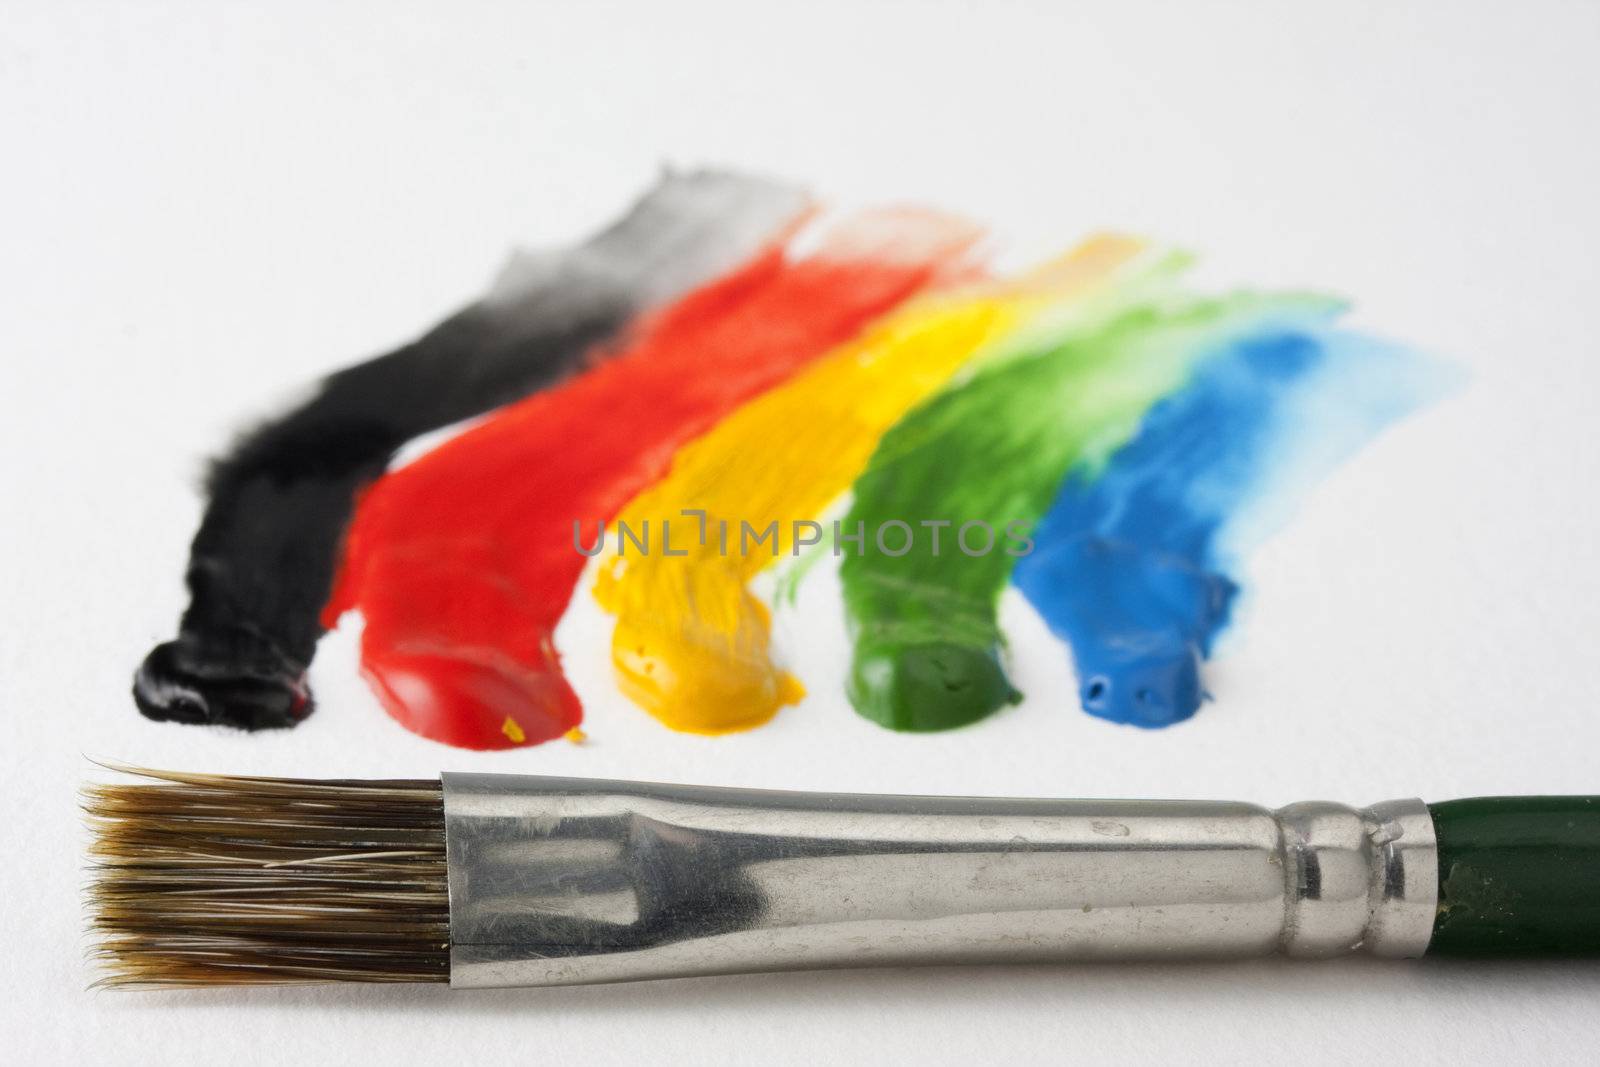 small paintbrush and 5 dabs (black, red, yellow, green, blue) of watercolor paint with smudges going out of focus on white textured paper